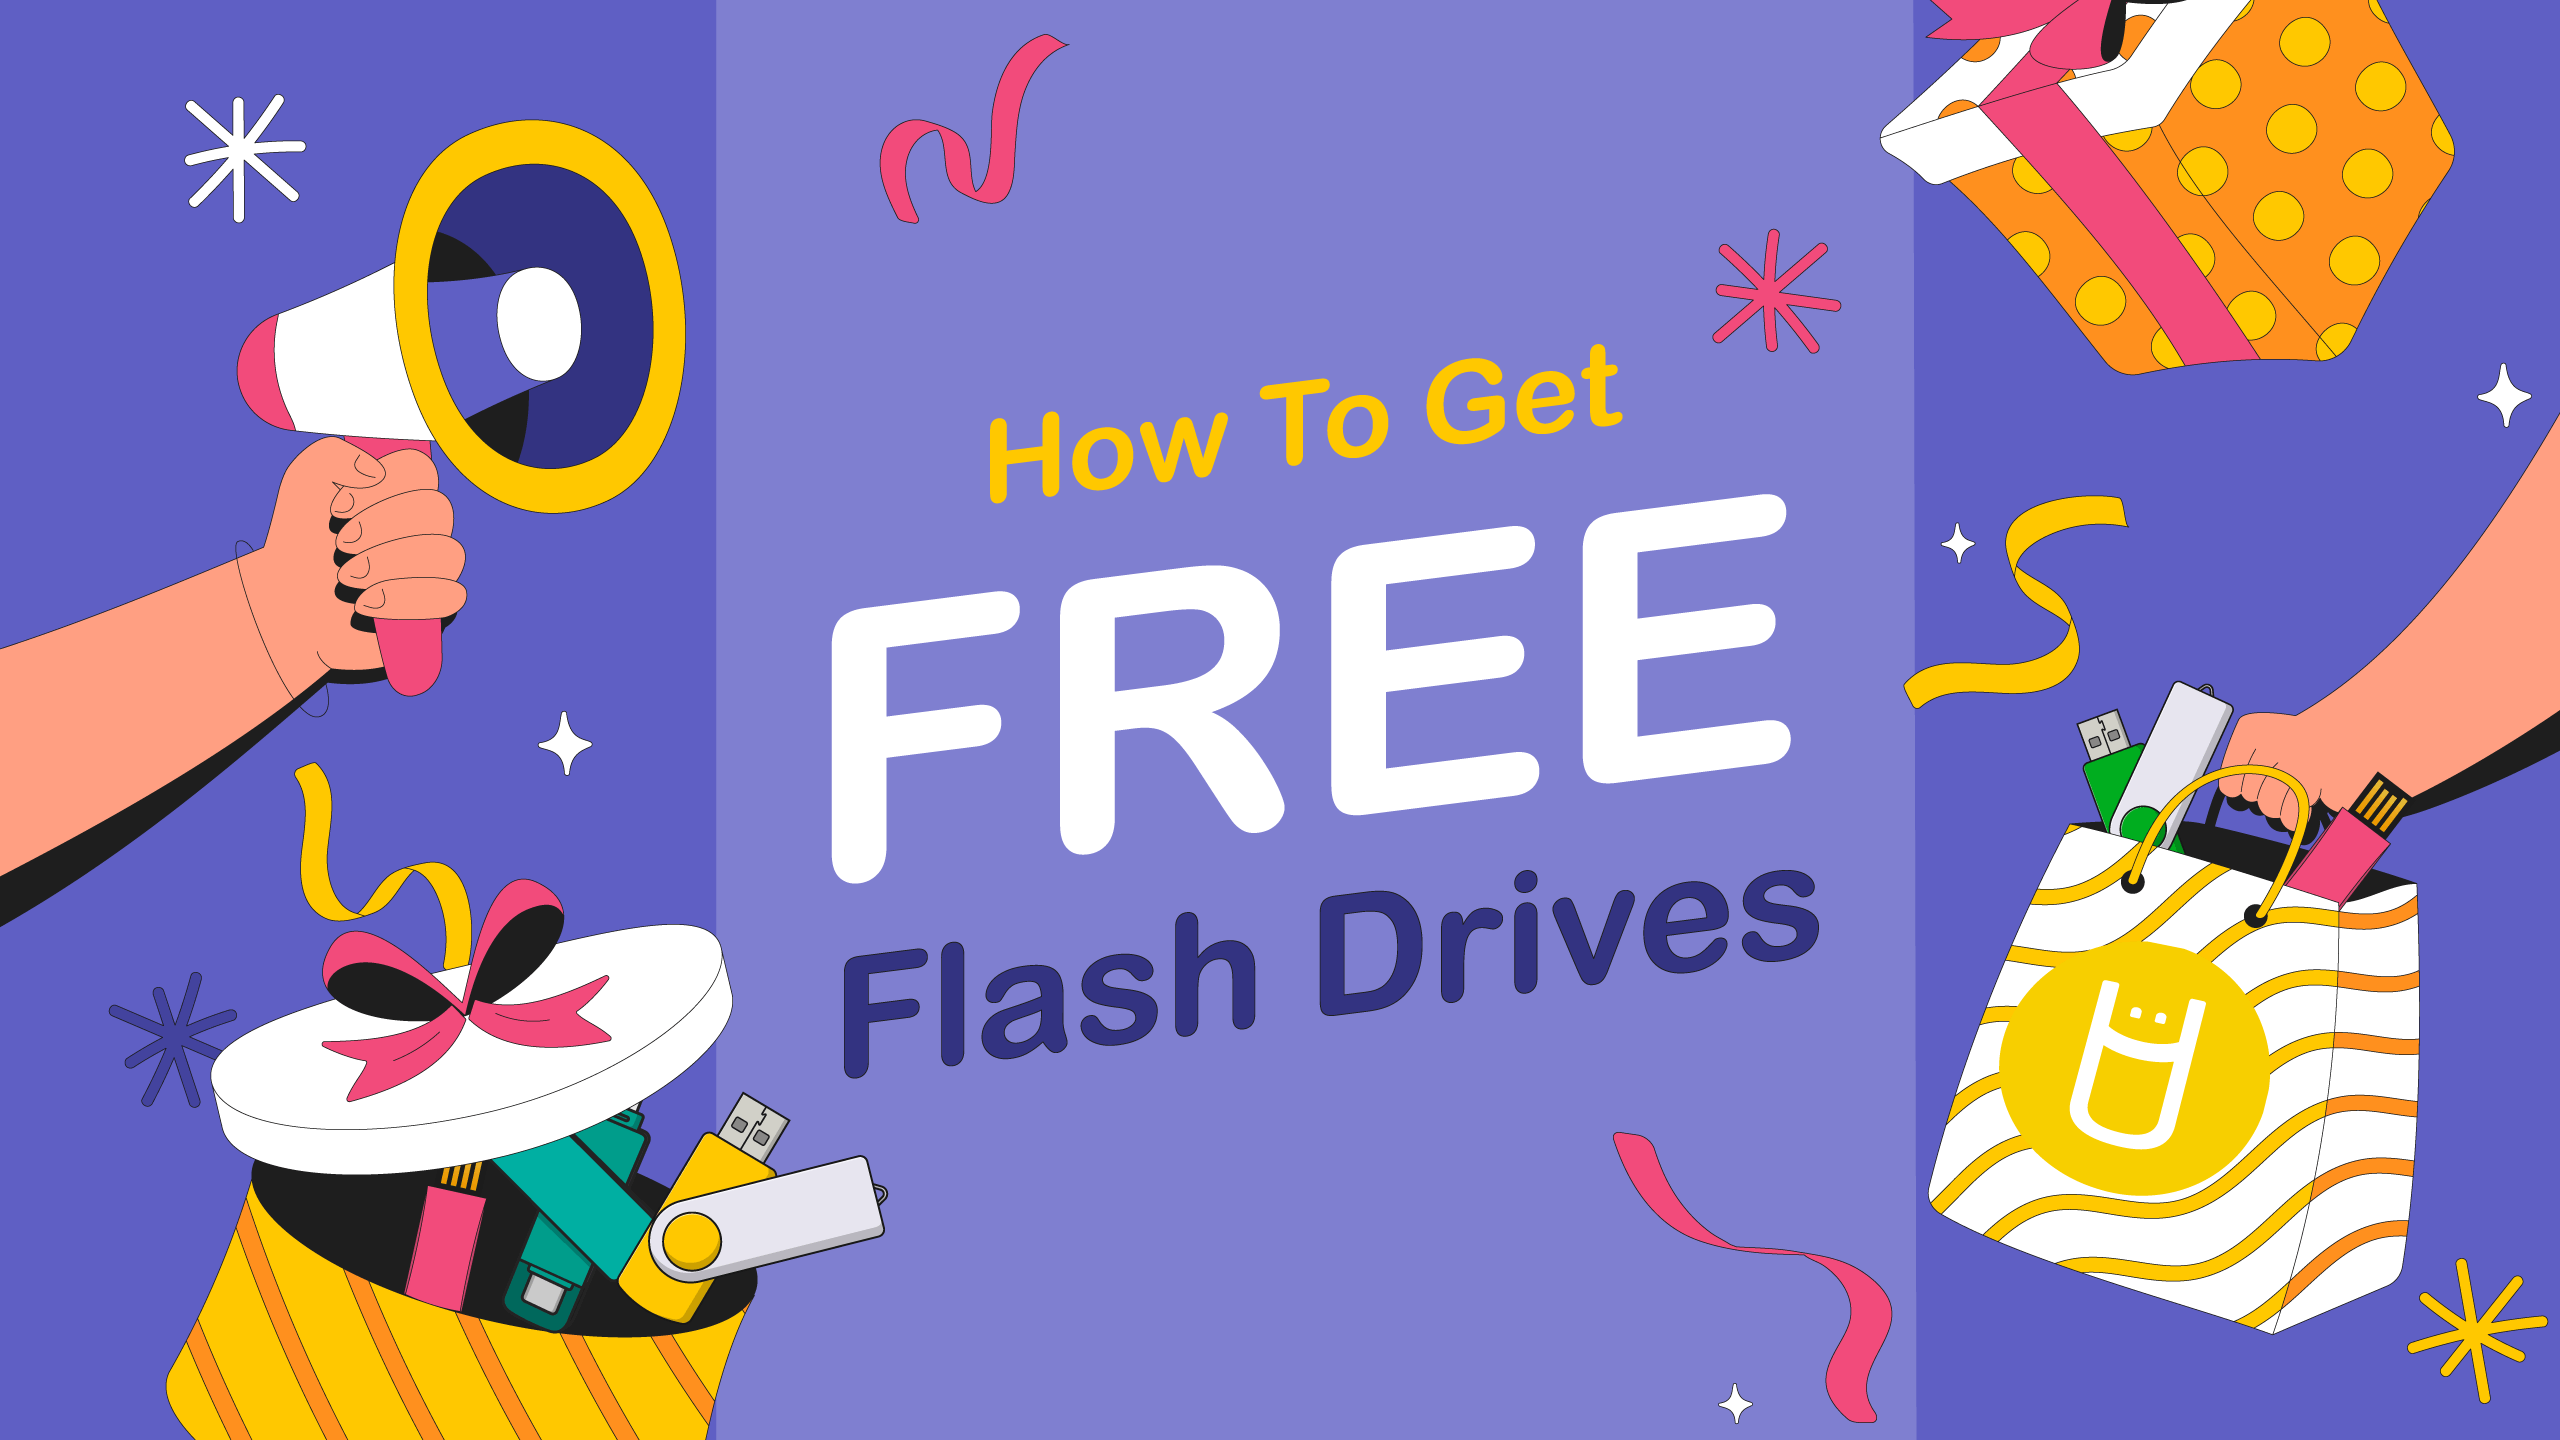 How To Get Free Flash Drives